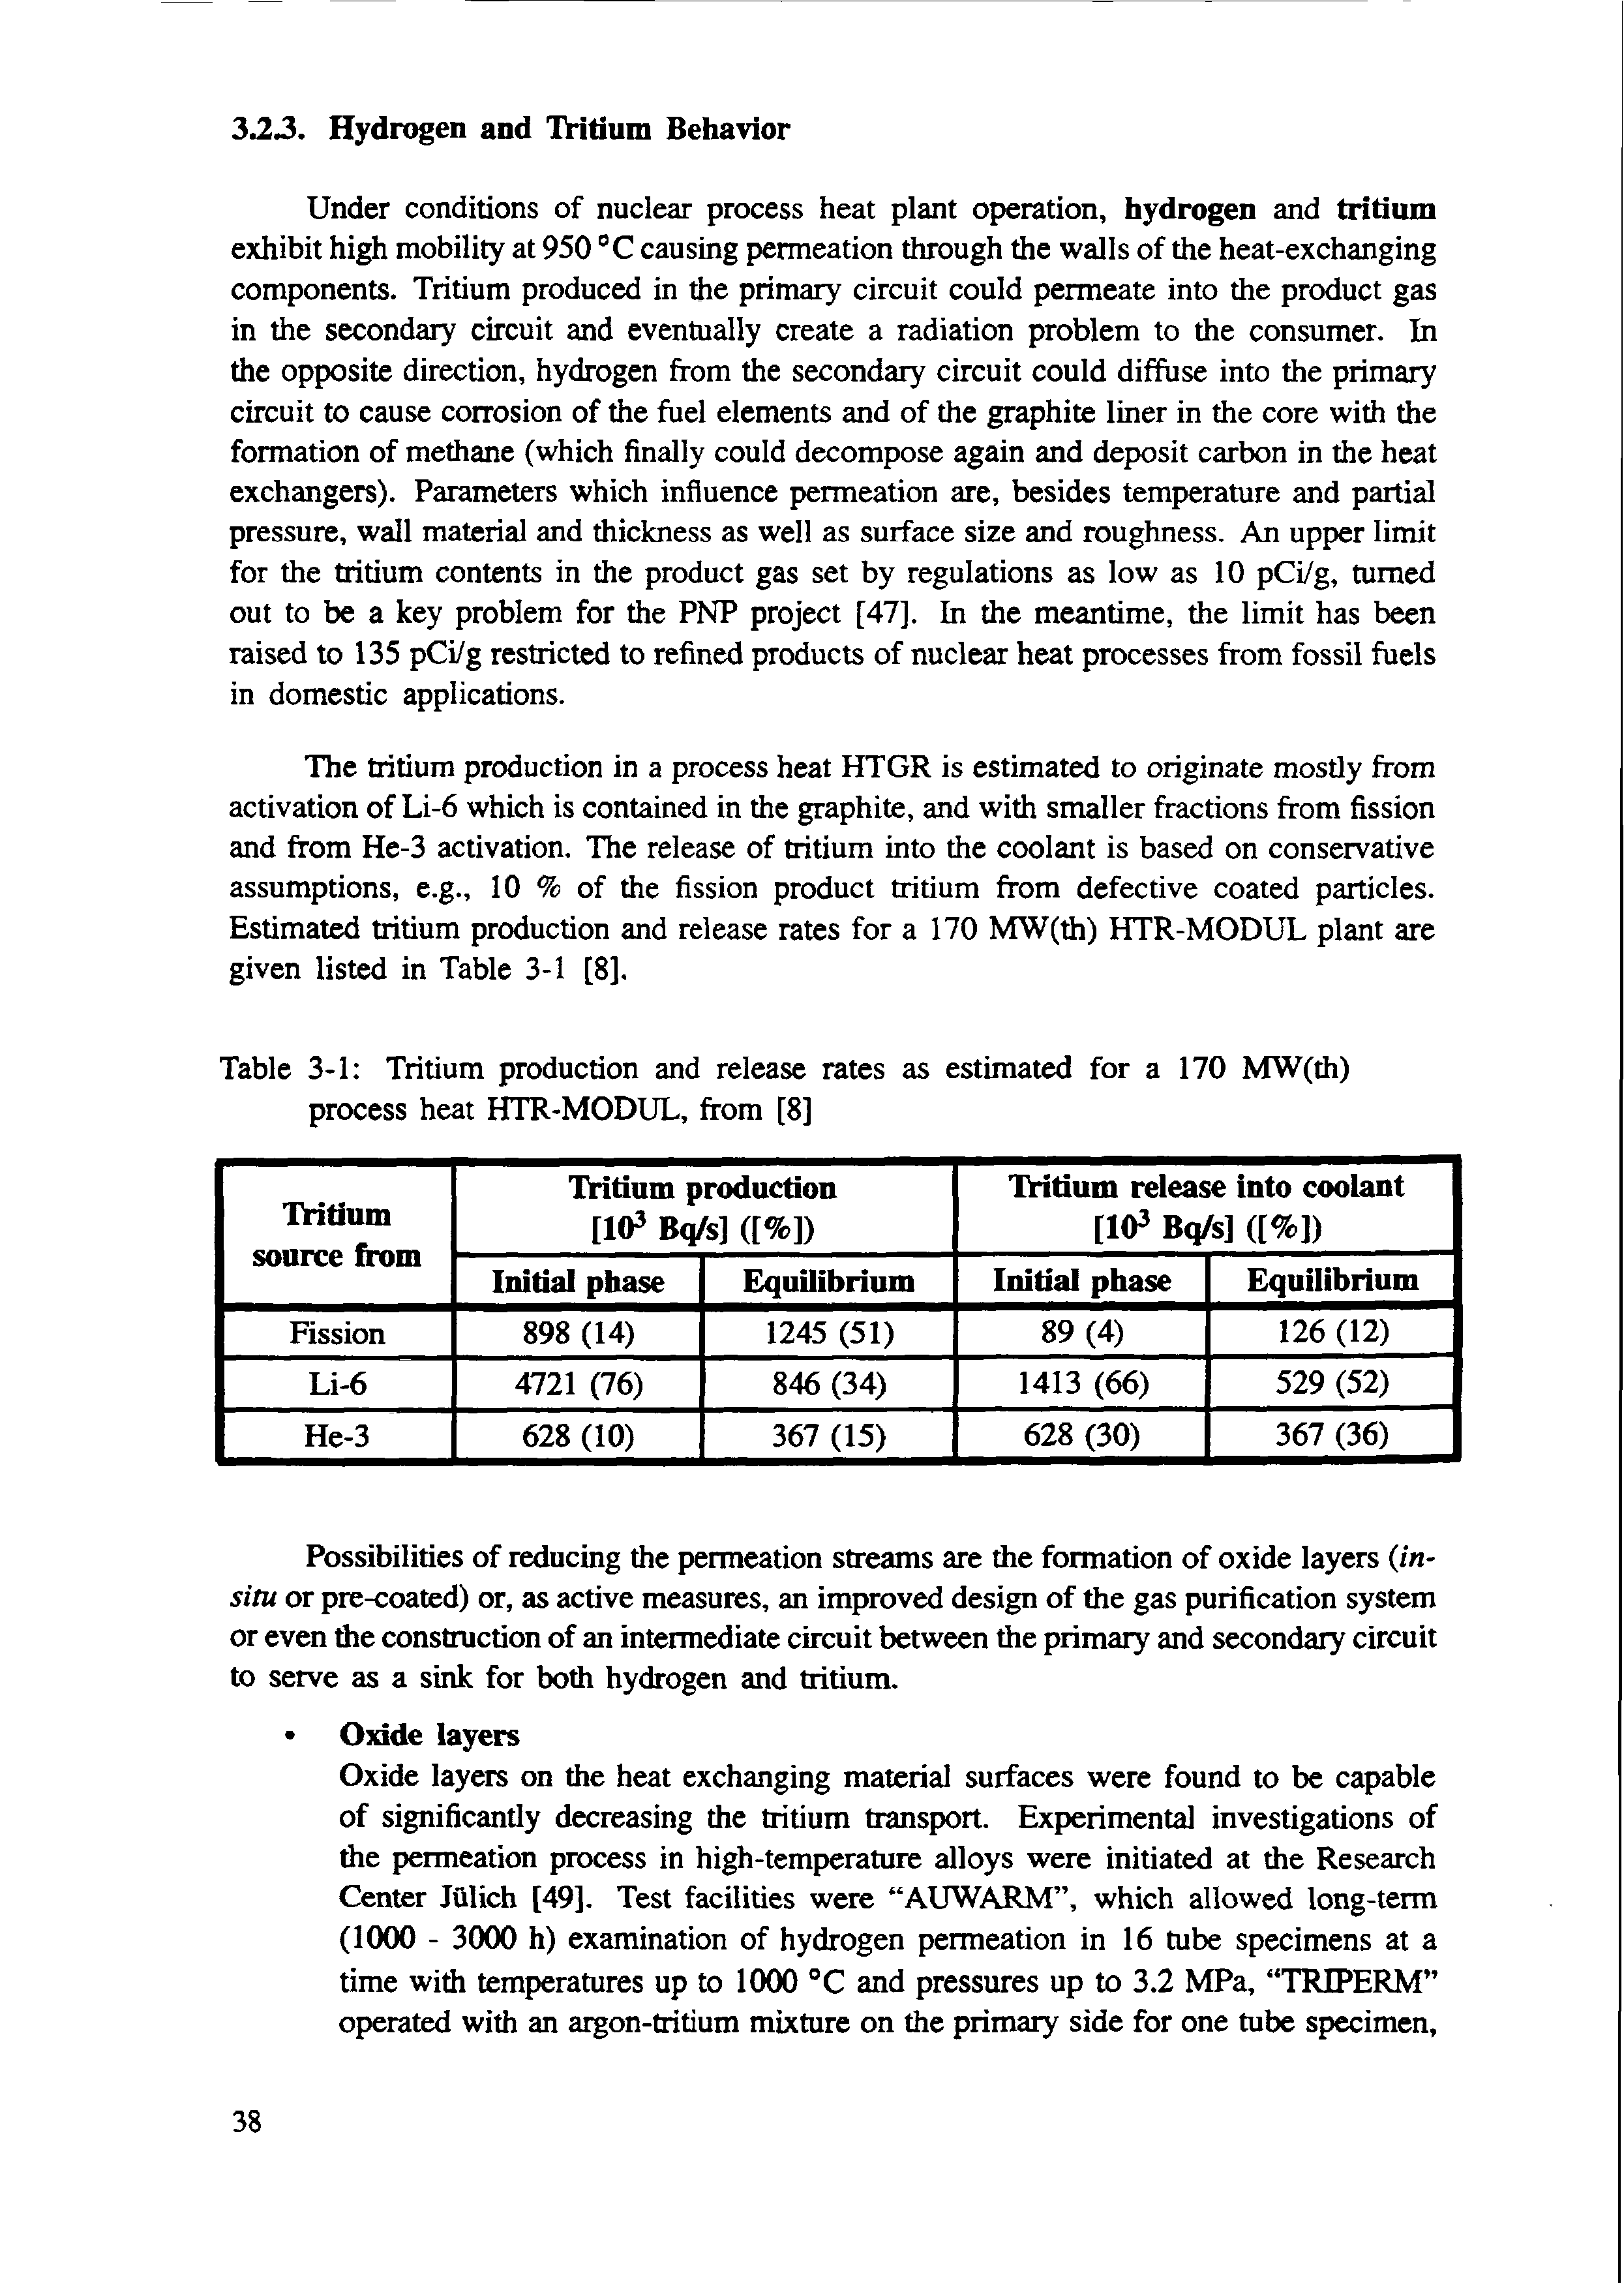 Table 3-1 Tritium production and release rates as estimated for a 170 MW(th) process heat HTR-MODUL, from [8]...